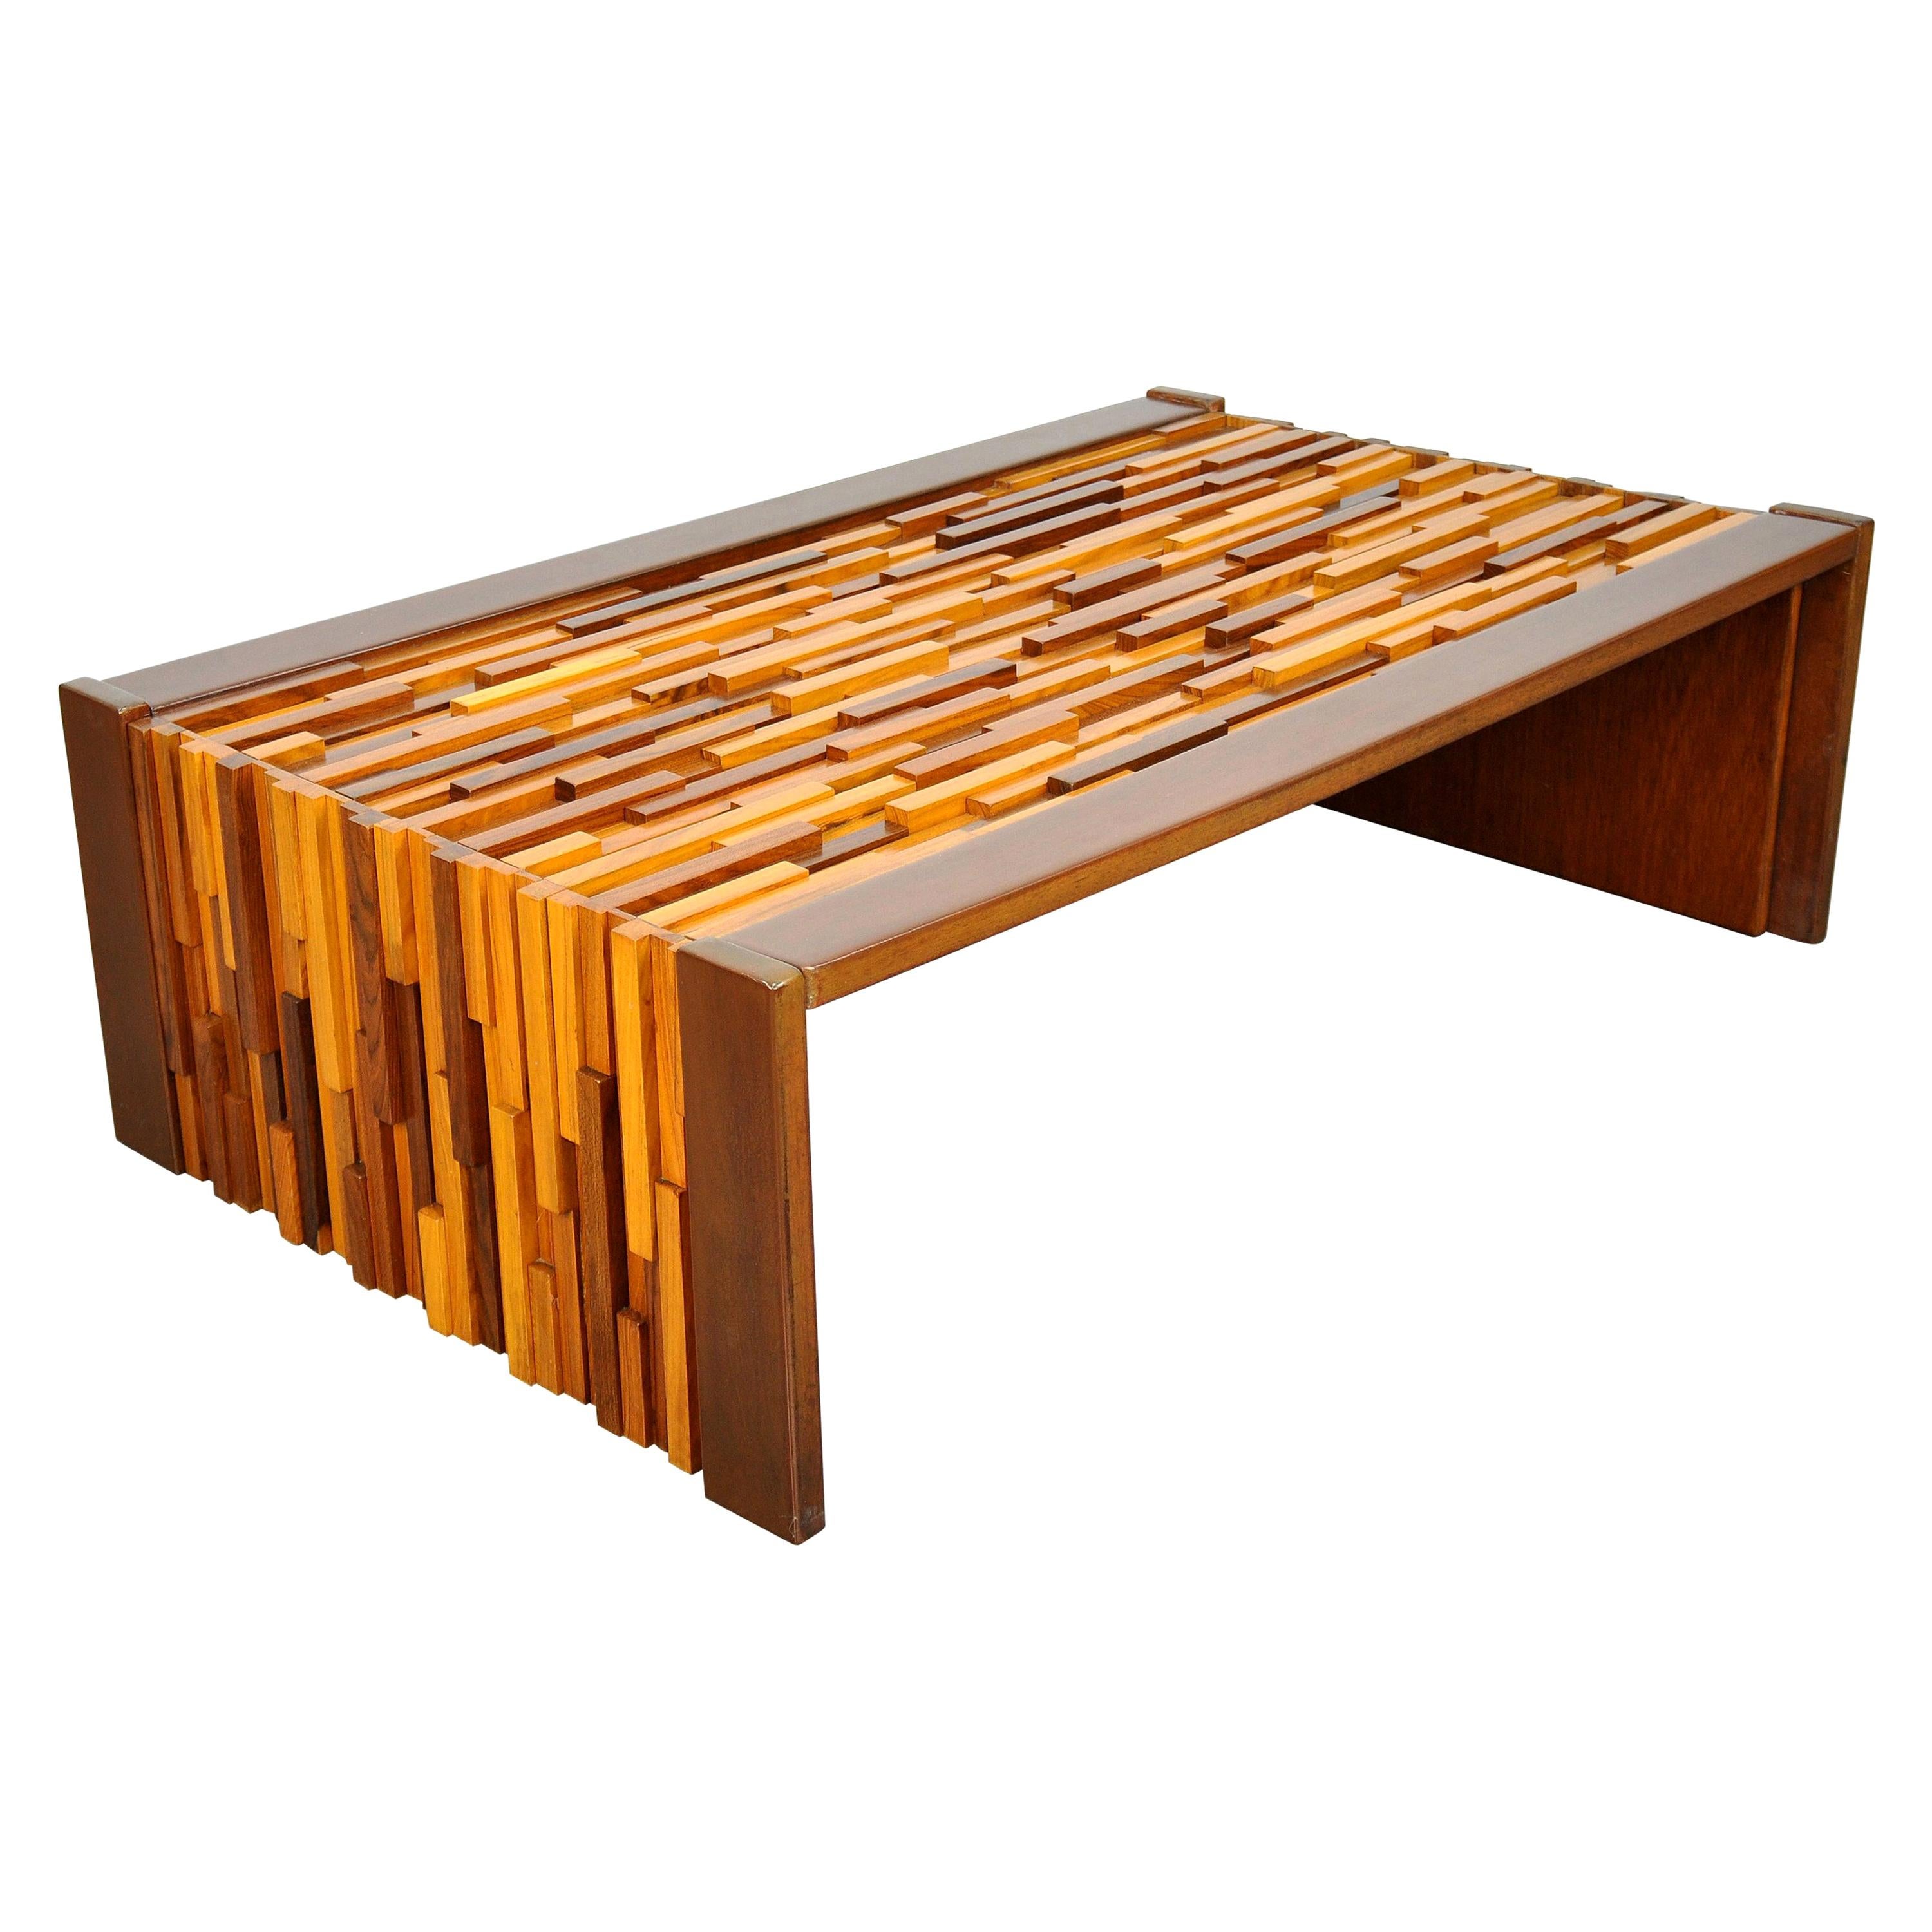 Percival Lafer Rosewood, Teak and Mahogany Brutalist Coffee Table